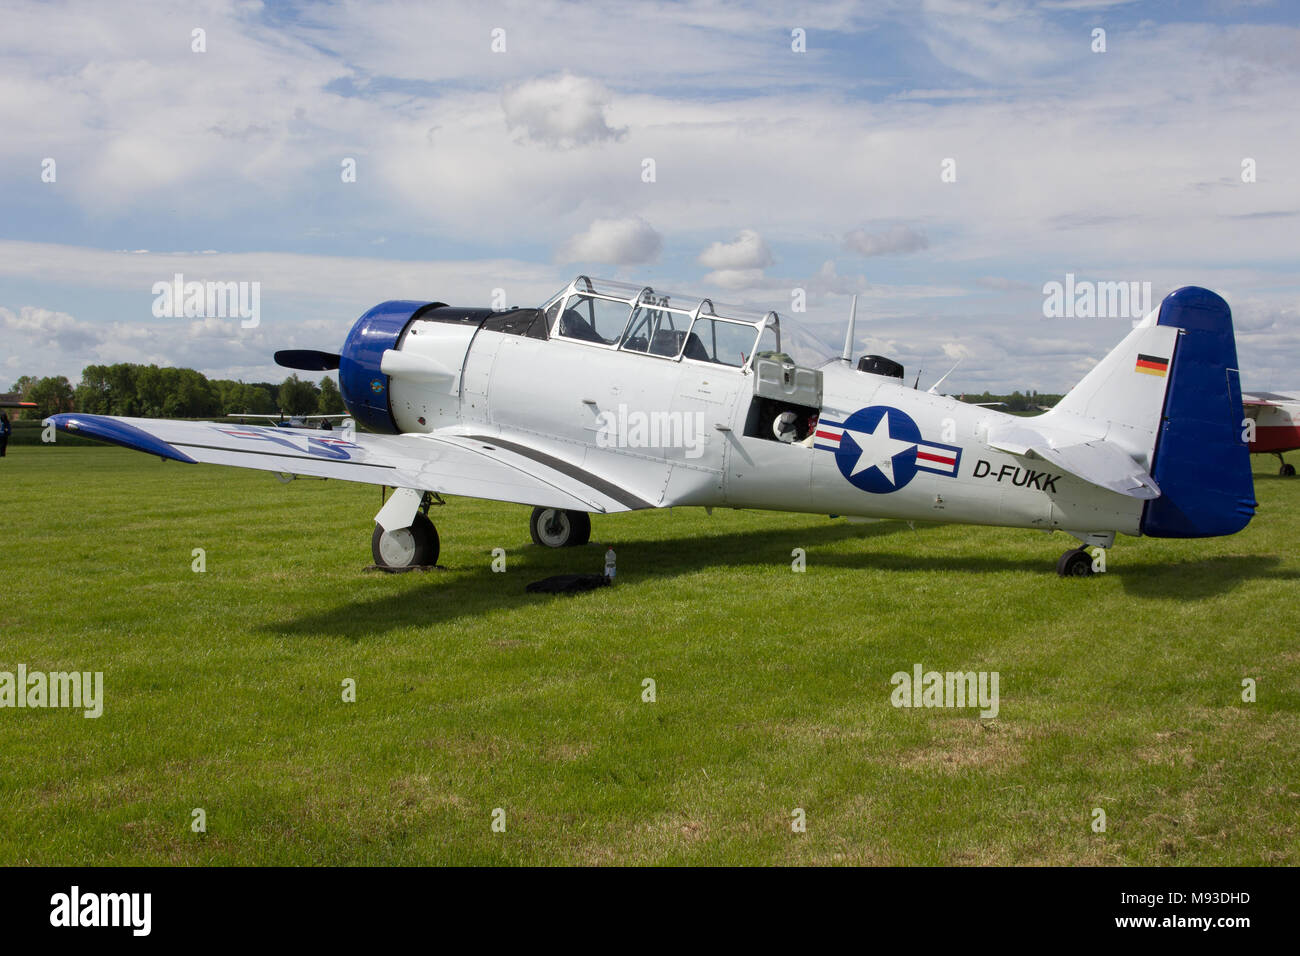 Oostwold, Netherlands May 25, 2015: A Harvard at Oostwold Airshow Stock Photo